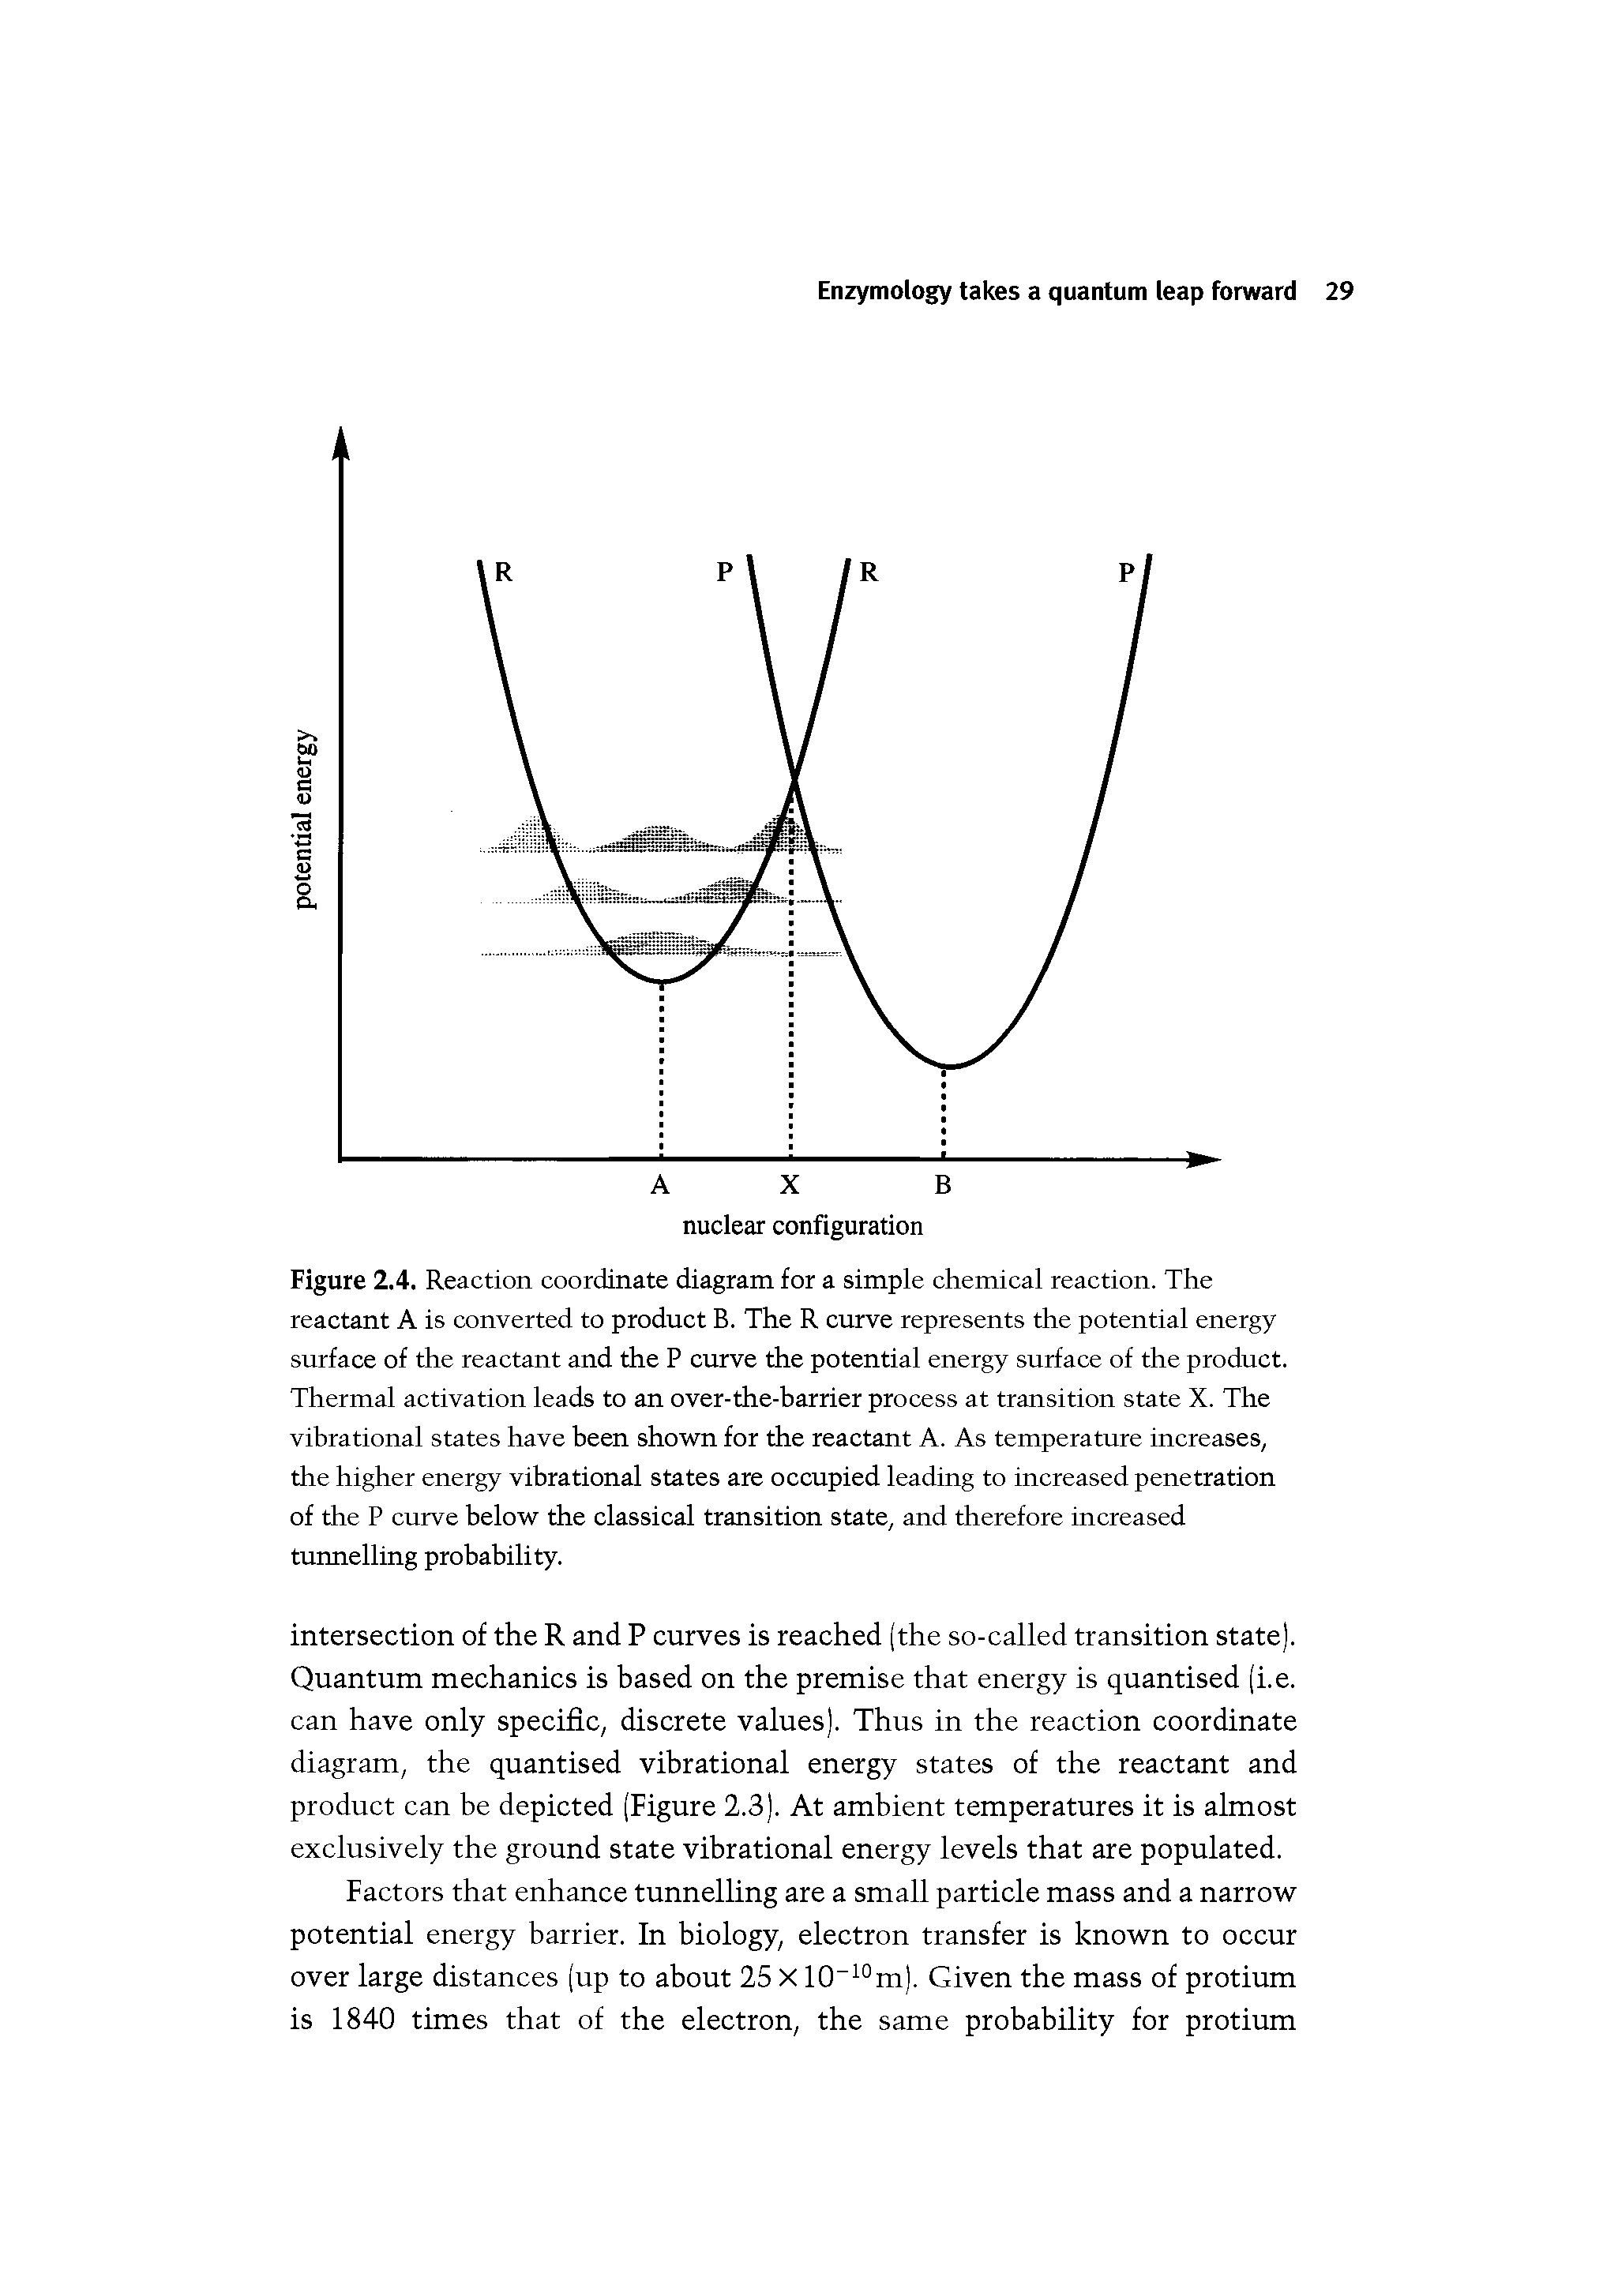 Figure 2.4. Reaction coordinate diagram for a simple chemical reaction. The reactant A is converted to product B. The R curve represents the potential energy surface of the reactant and the P curve the potential energy surface of the product. Thermal activation leads to an over-the-barrier process at transition state X. The vibrational states have been shown for the reactant A. As temperature increases, the higher energy vibrational states are occupied leading to increased penetration of the P curve below the classical transition state, and therefore increased tunnelling probability.